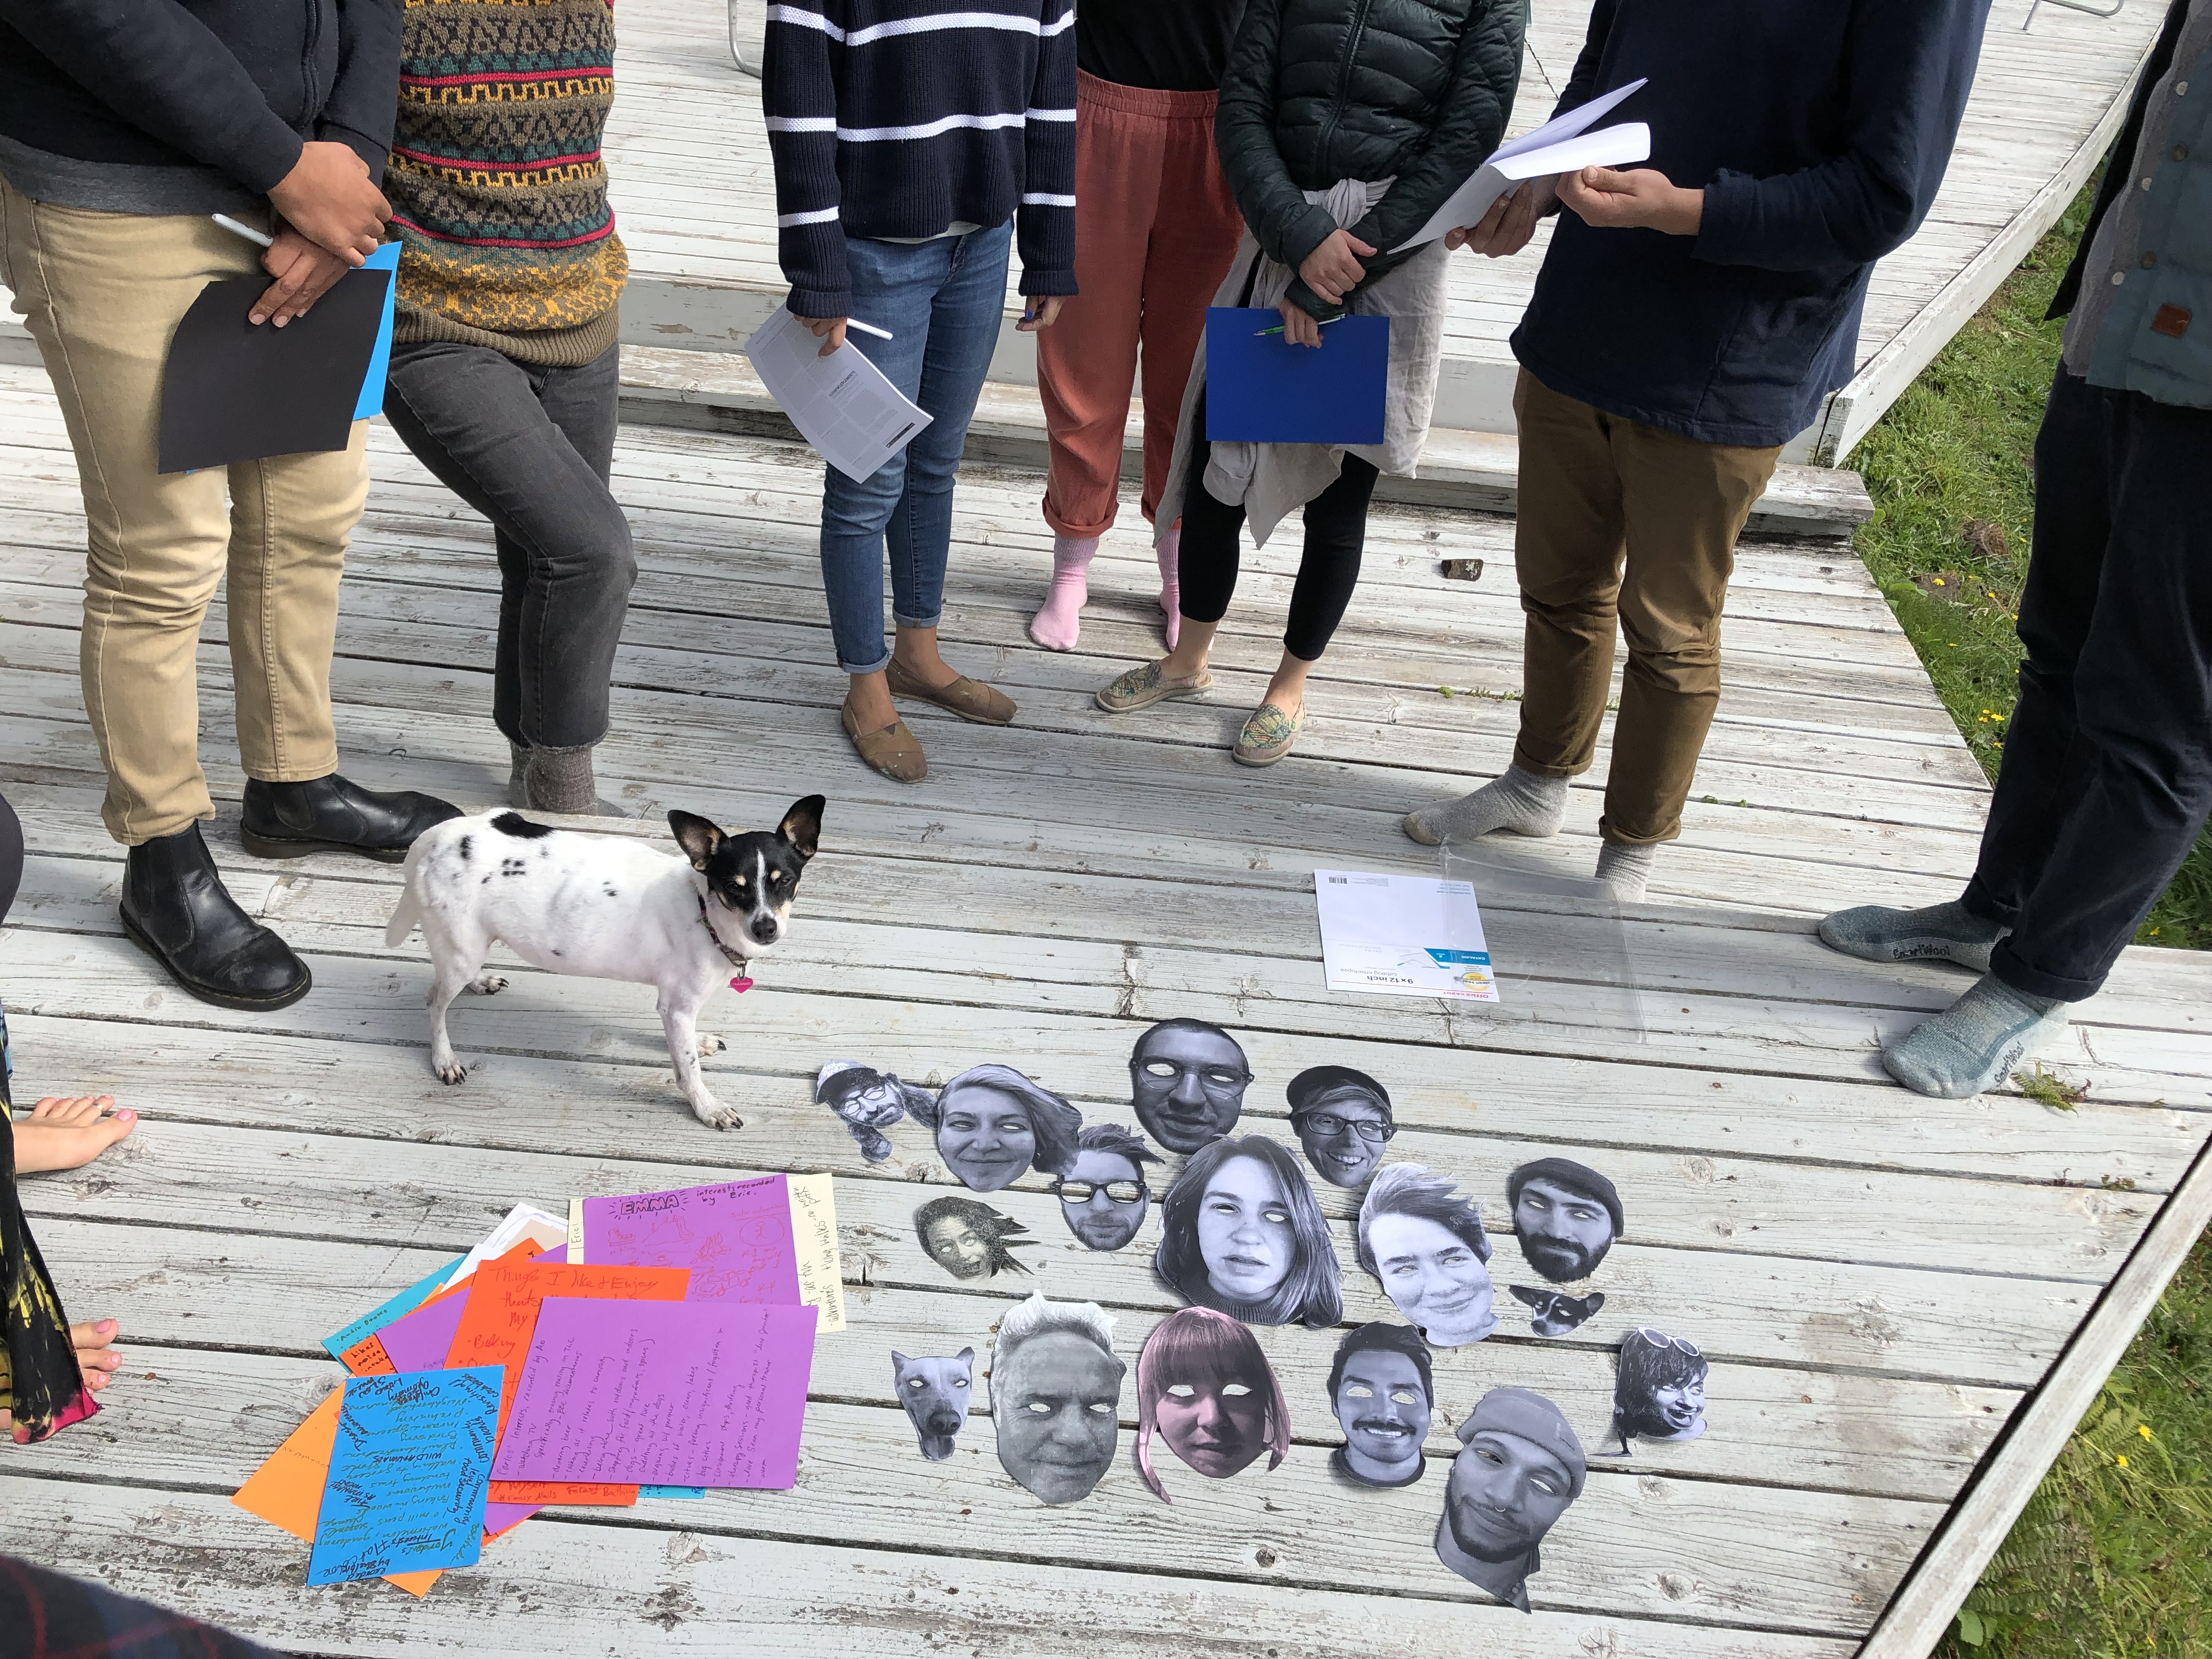 An assortment of masks laid out on a wooden deck before a group of students and a small dog